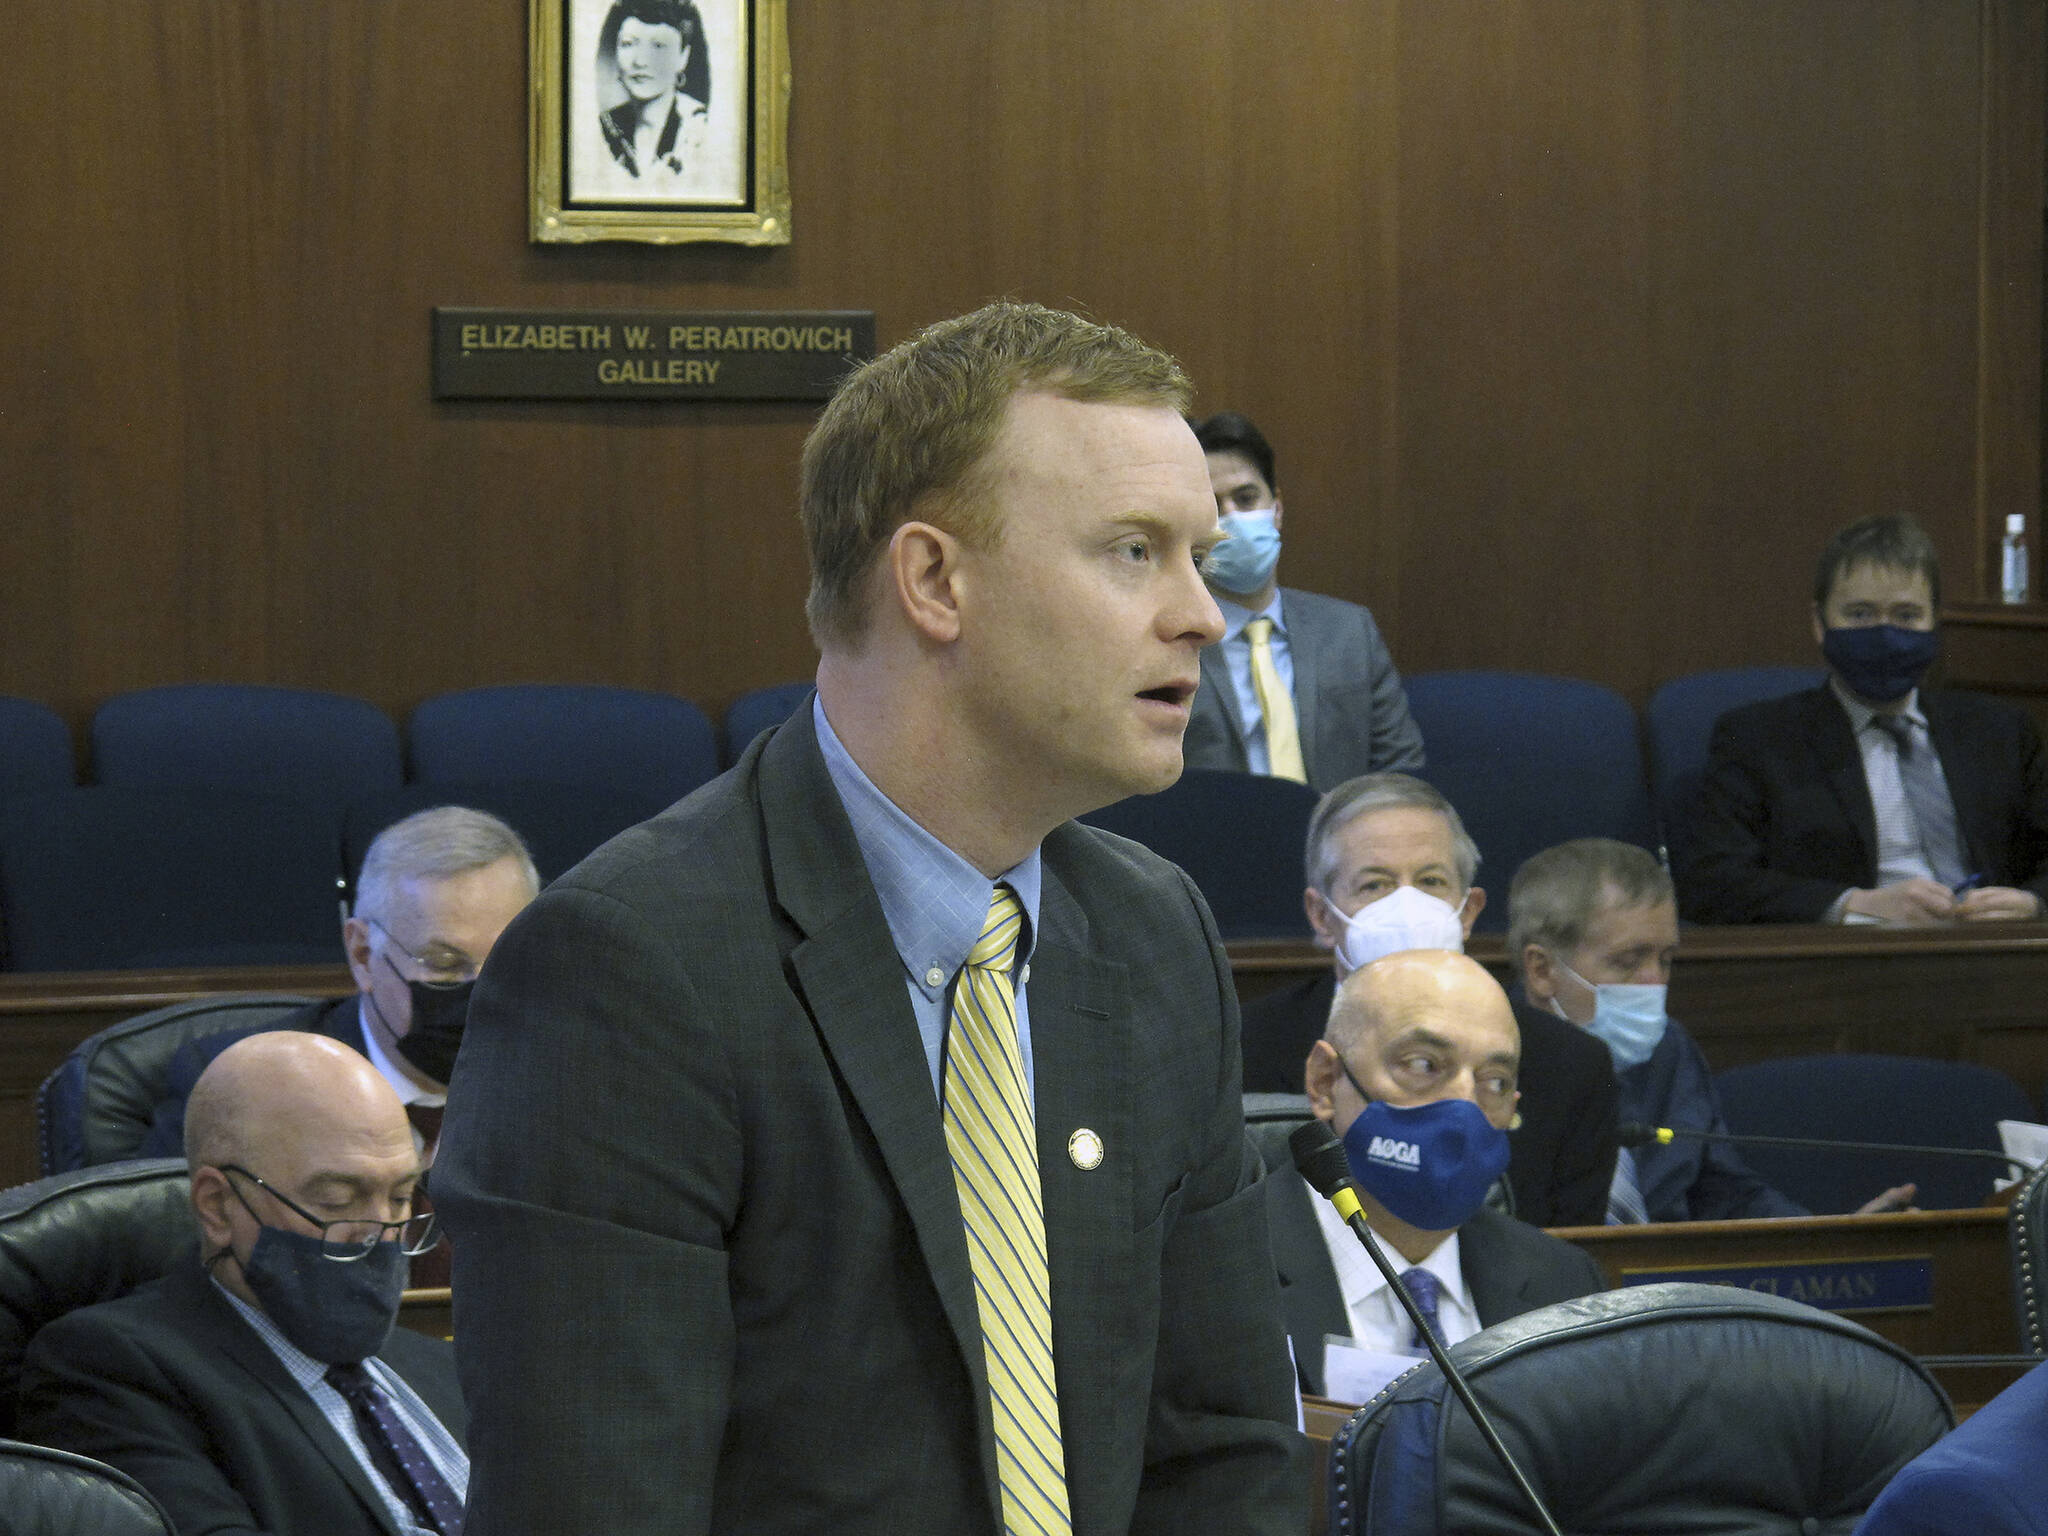 Alaska Republican state Rep. David Eastman speaks on the floor of the Alaska House on Monday, Jan. 31, 2022, in Juneau, Alaska. The Alaska House tabled action Monday on a proposal to remove from legislative committees Eastman, who has said he joined the Oath Keepers far-right organization years ago. The House Committee on Committees voted 5-2 to remove Republican Rep. Eastman of Wasilla from his committee assignments, said Joe Plesha, communications director for the House’s bipartisan majority. (AP Photo/Becky Bohrer)